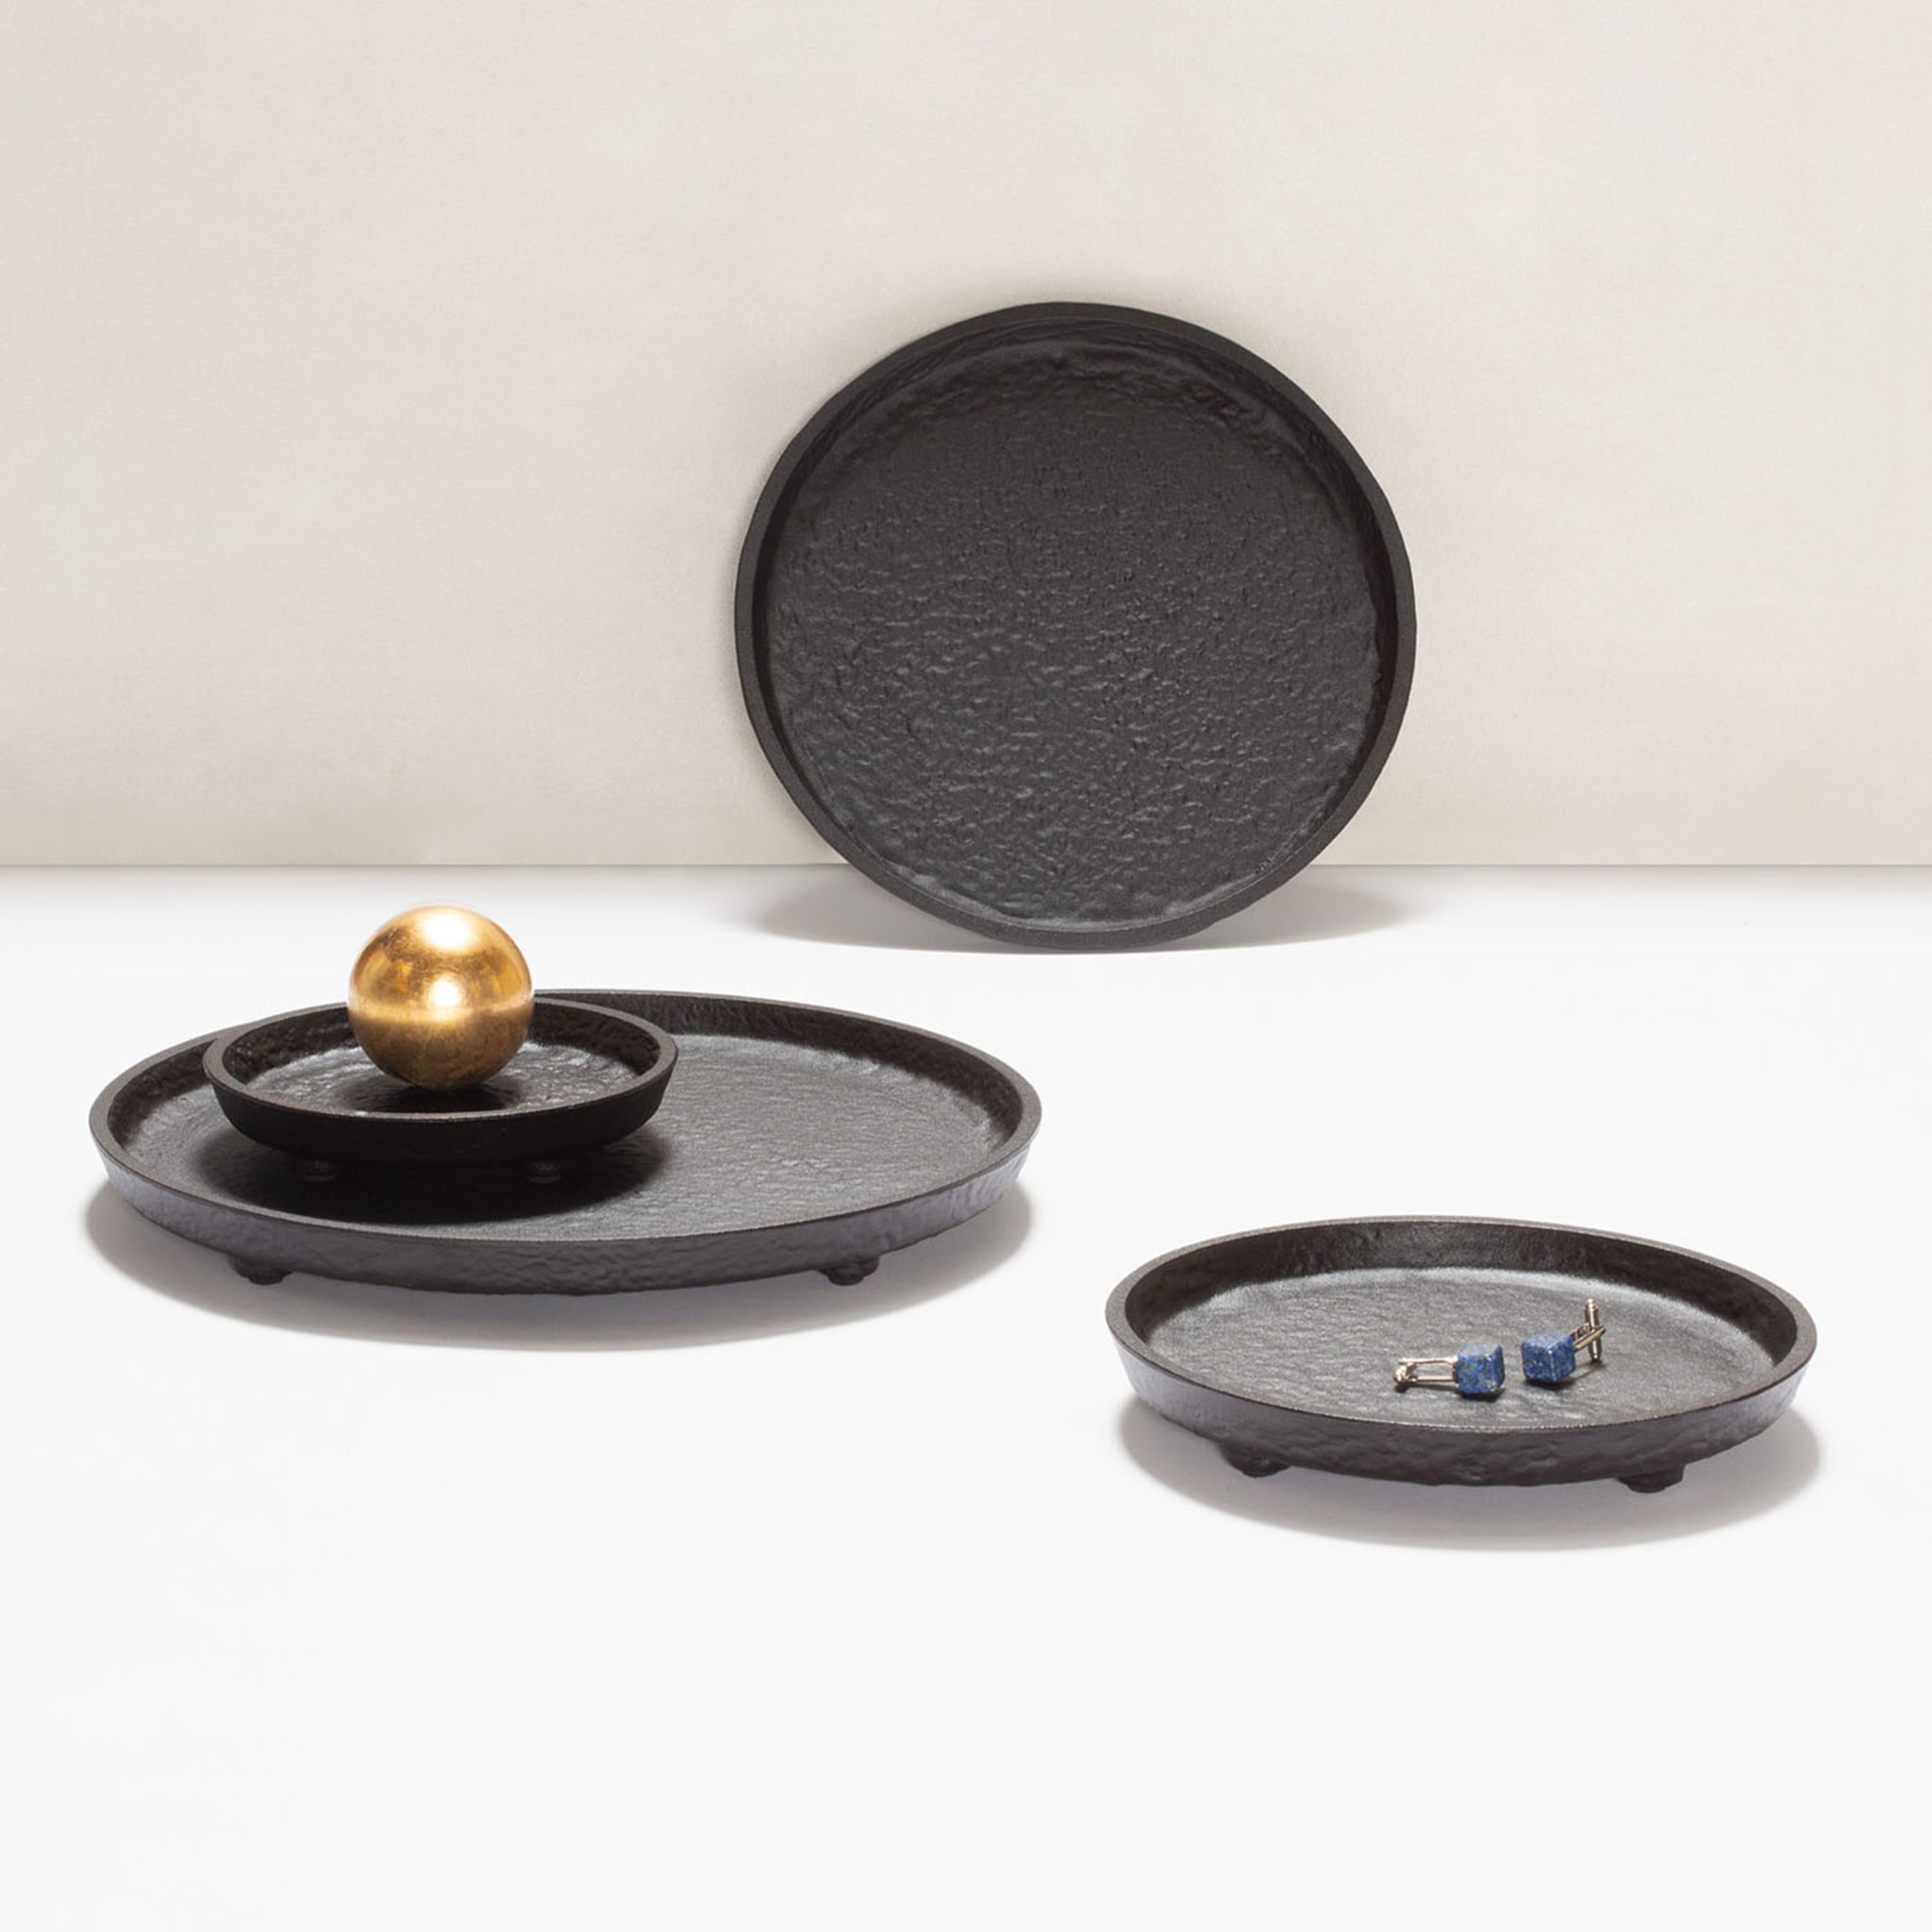 Monza Imperfect Bronze Round Large Valet Tray - Alternative view 1